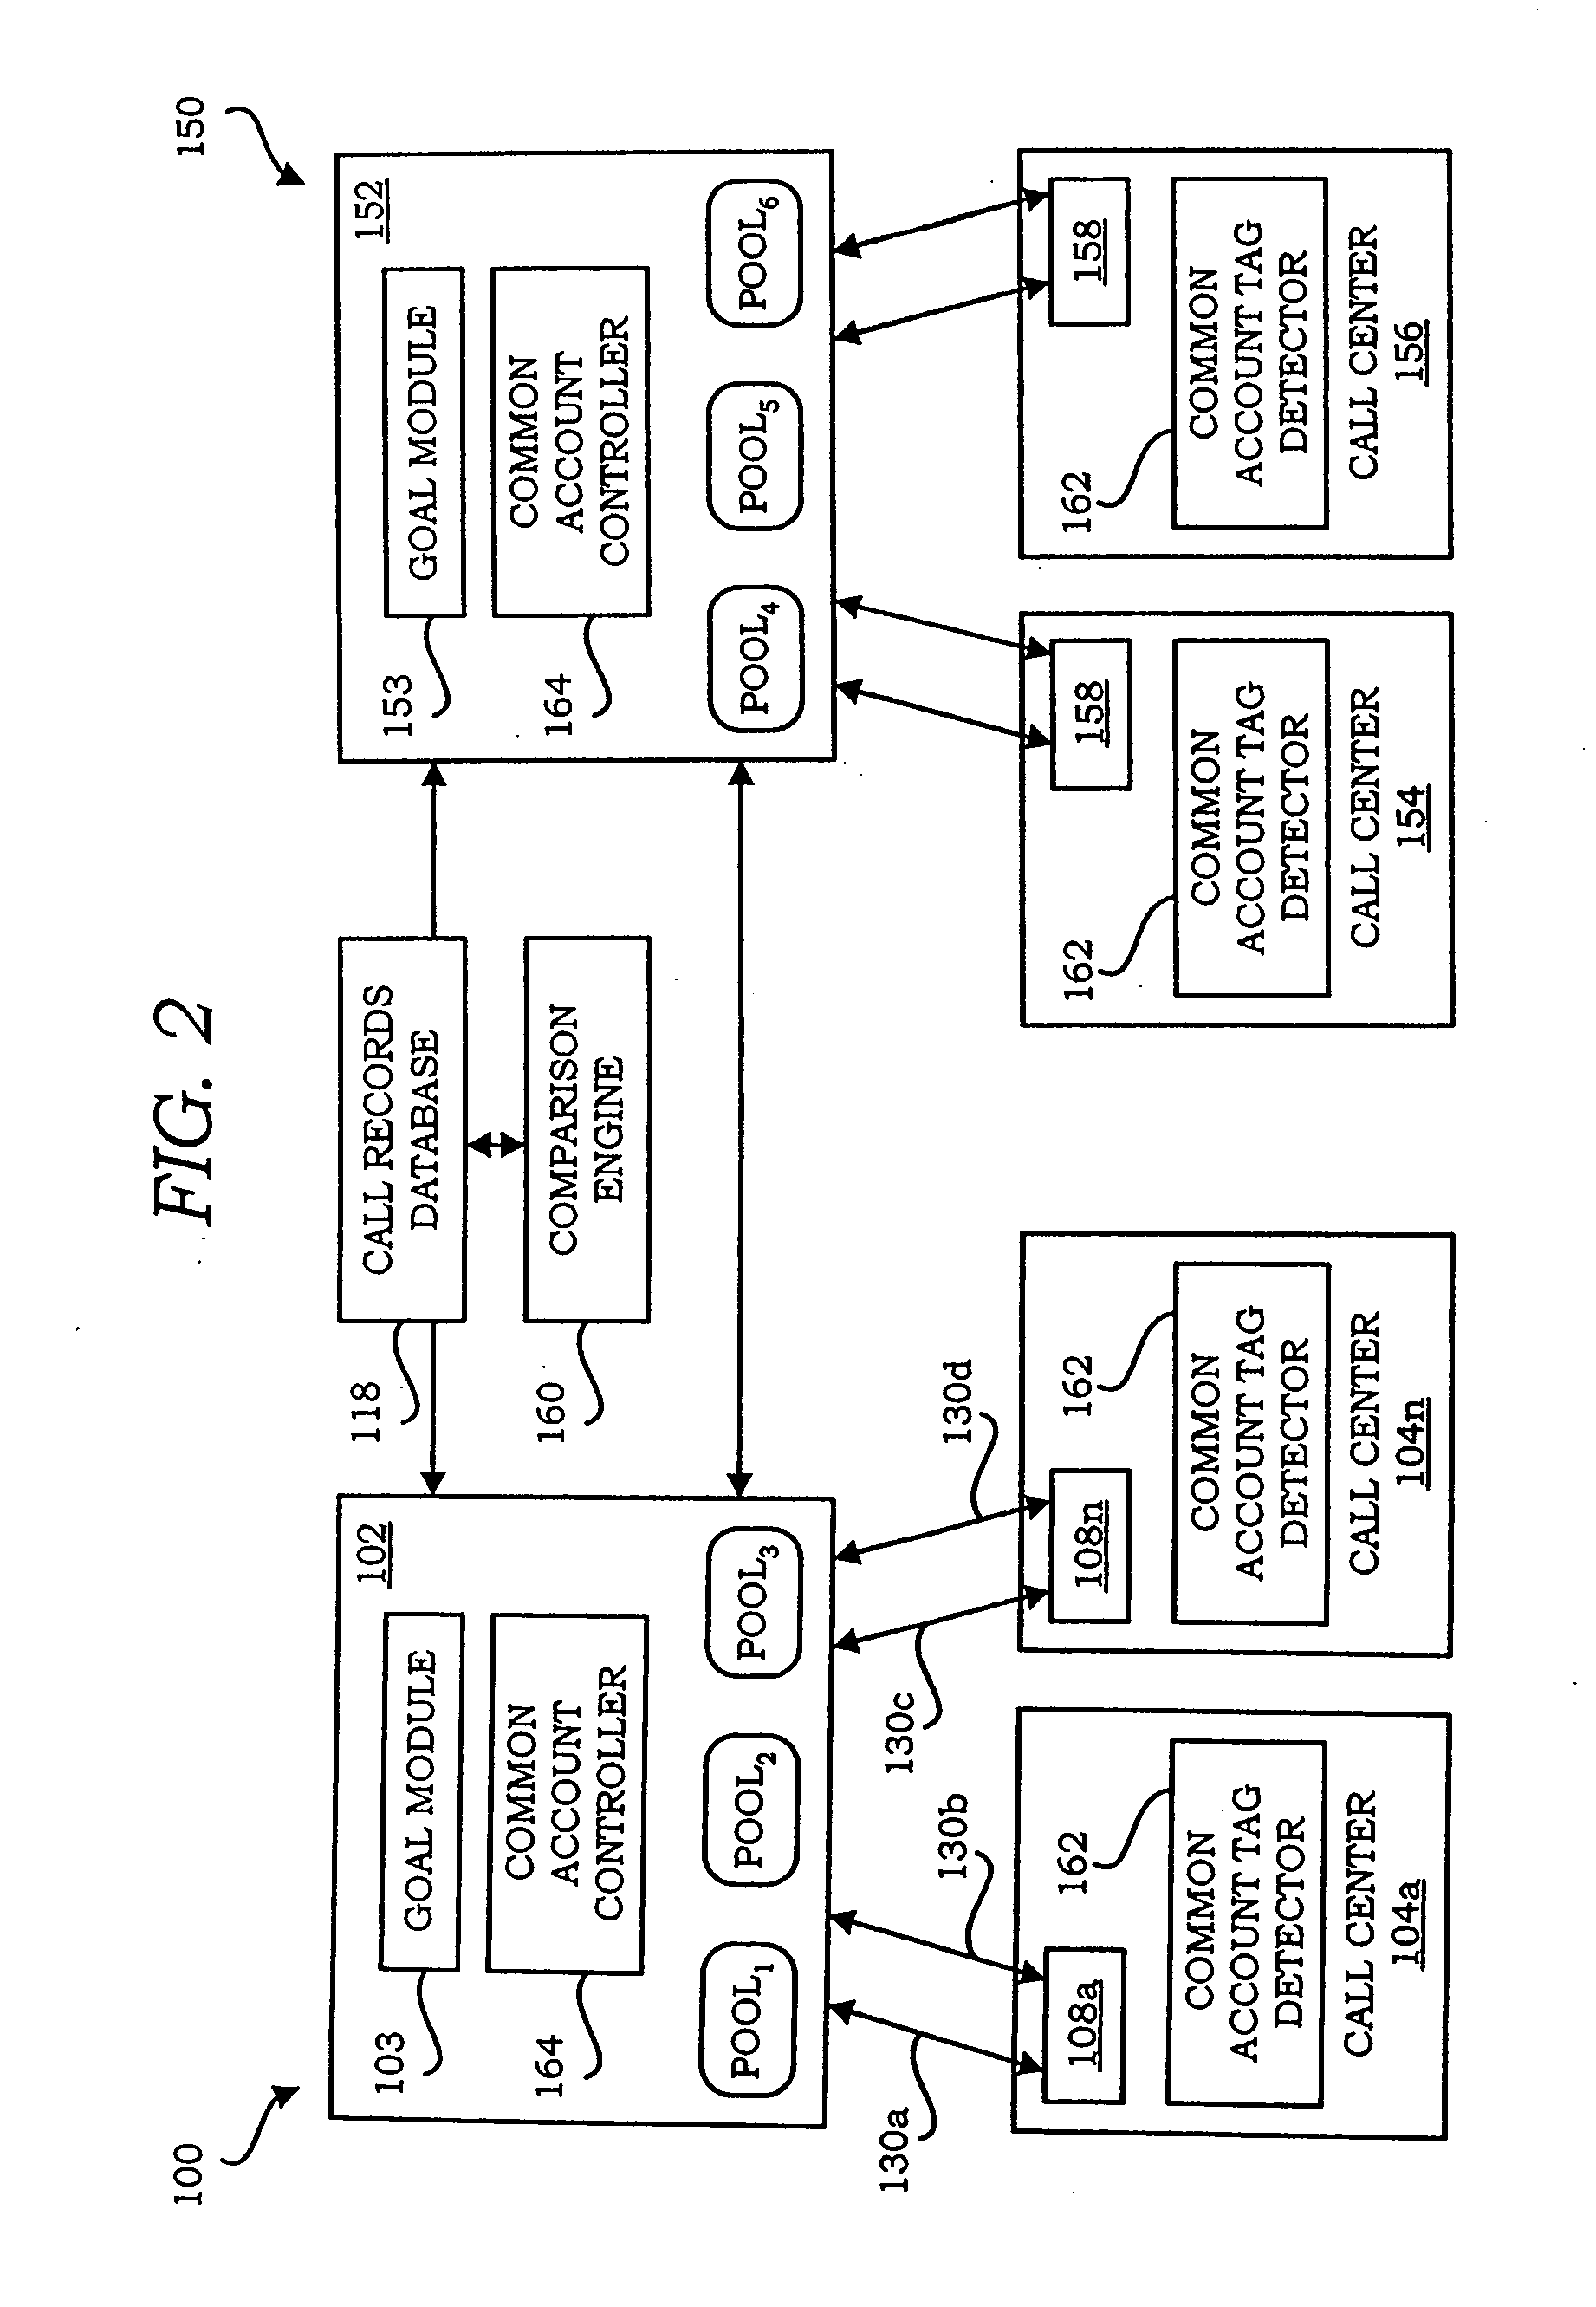 System and method for common account based routing of contact records